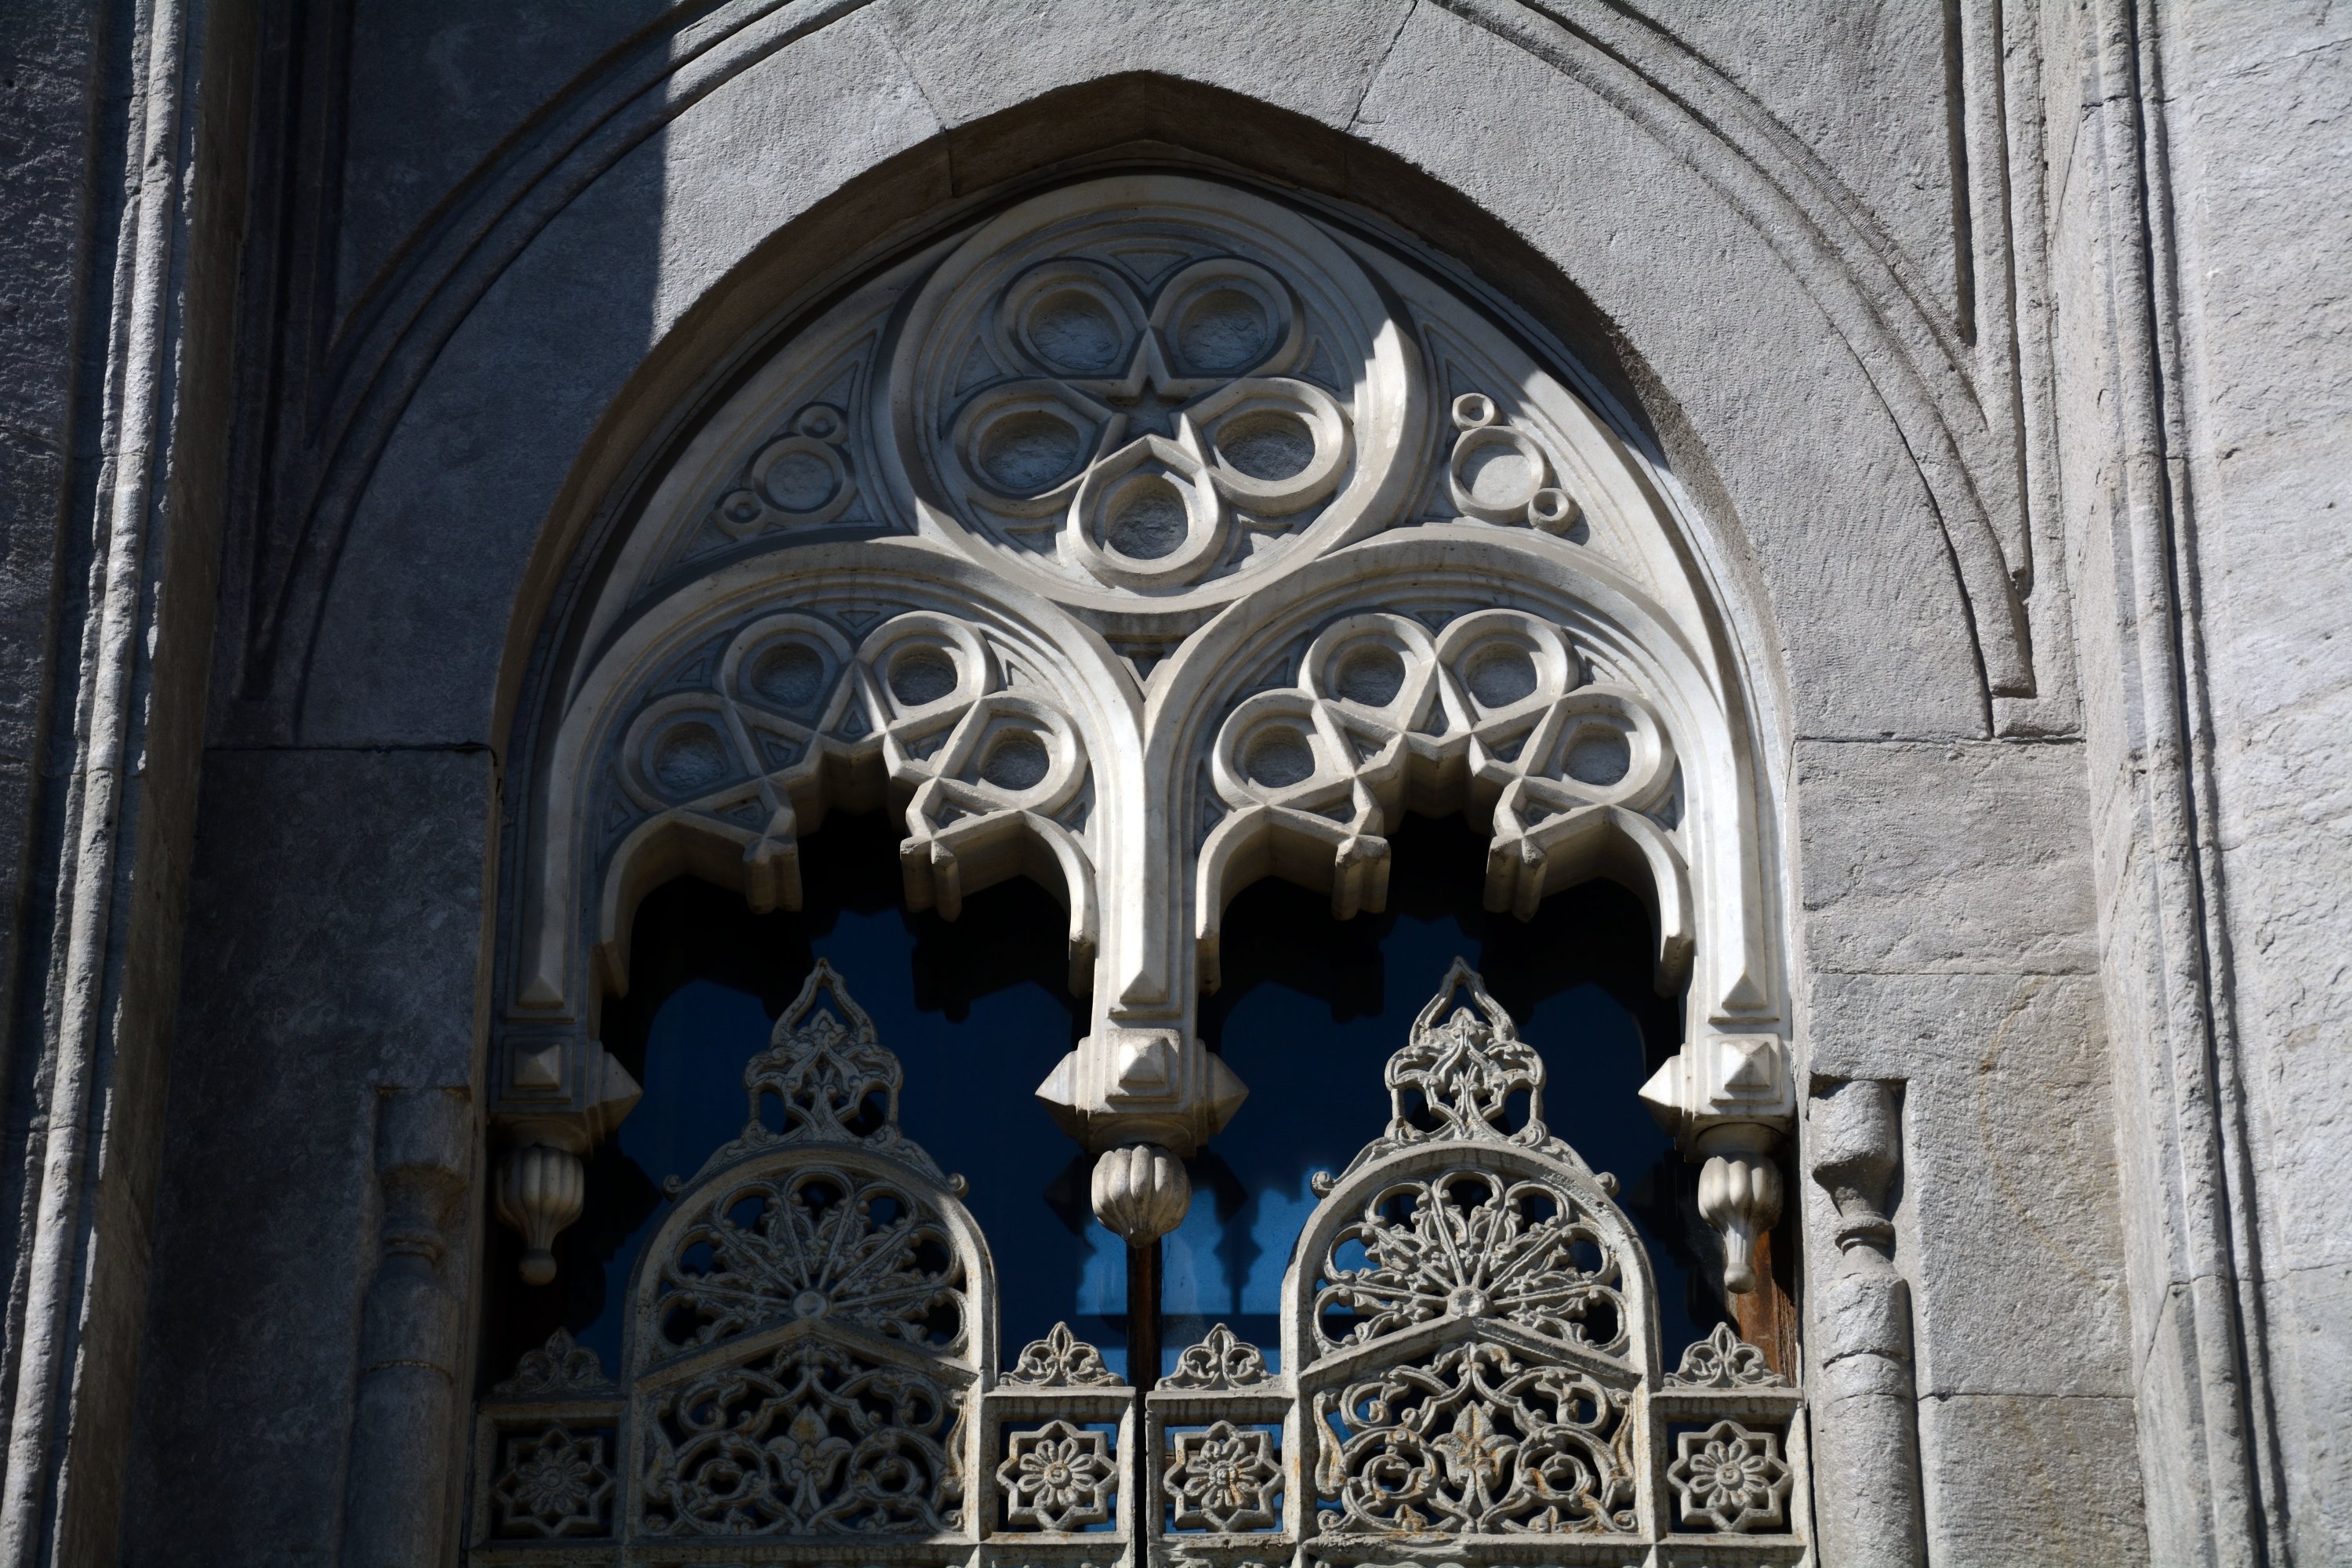 A close-up of the architectural details of the Pertevniyal Valide Sultan Mosque, Aksaray, Istanbul, March 17, 2019. (Shutterstock) 